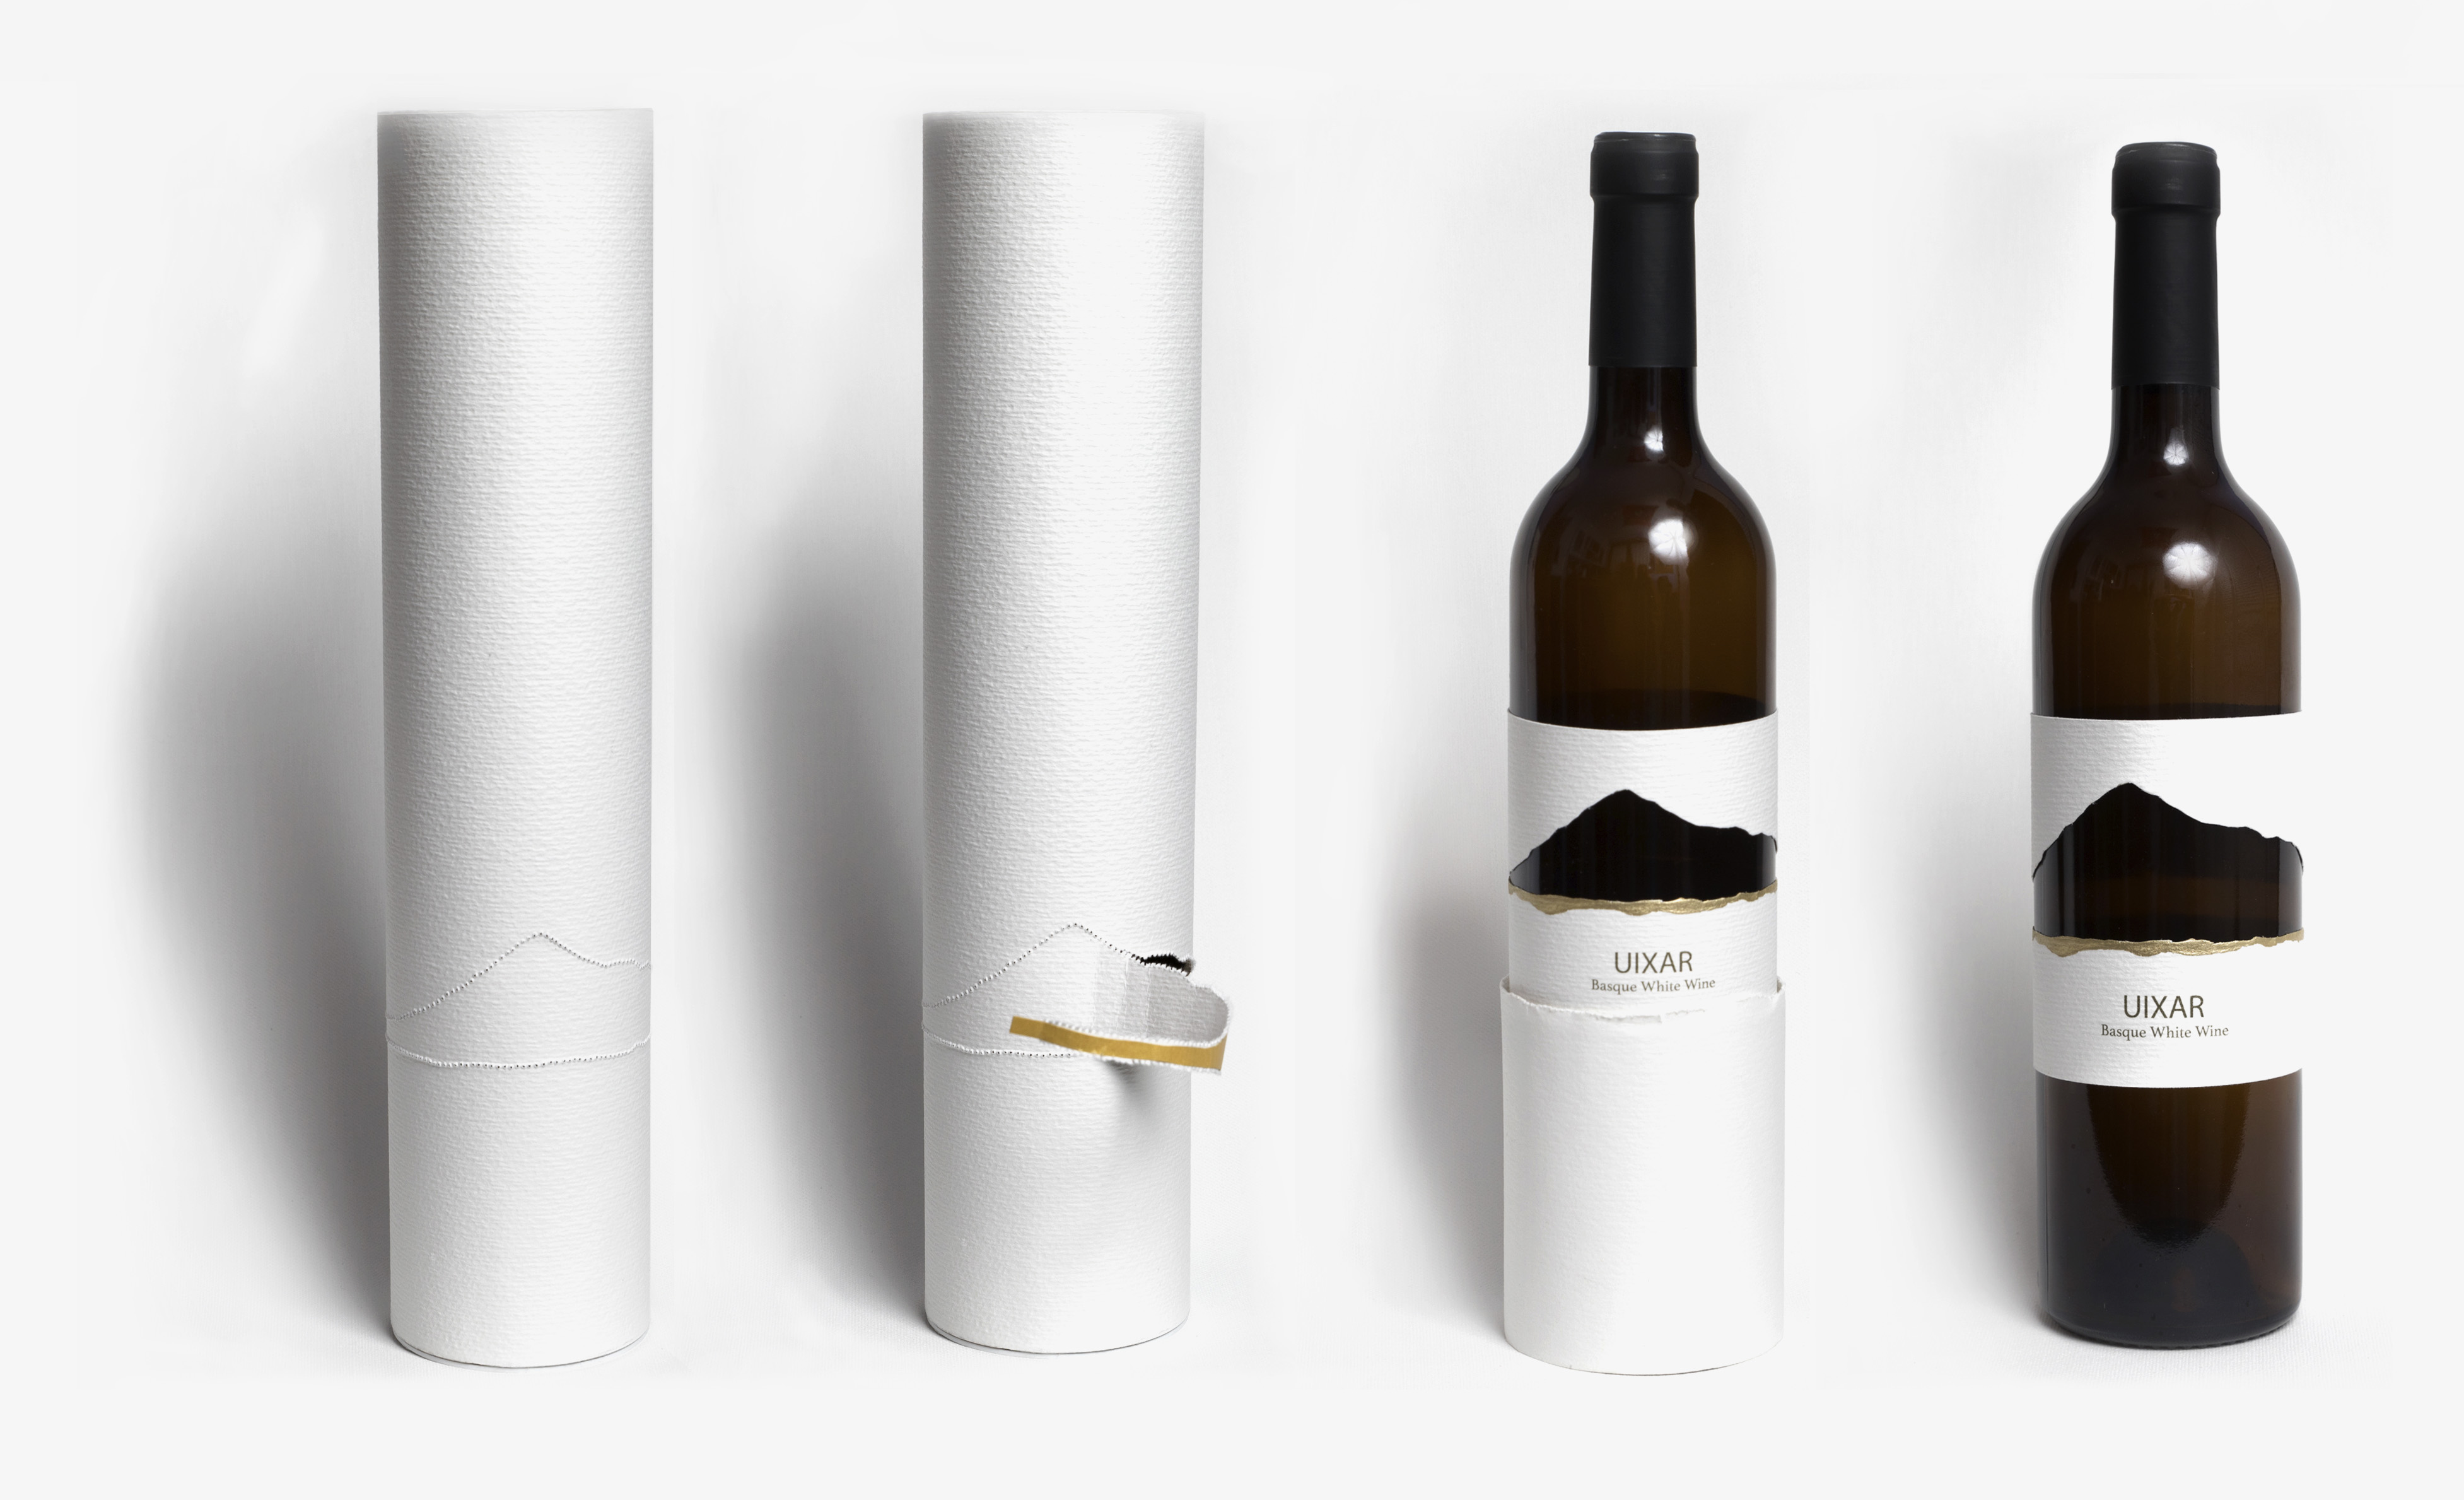 Label and packaging design for Txakoli Uixar by Laura Freijo - Creative Work - $i